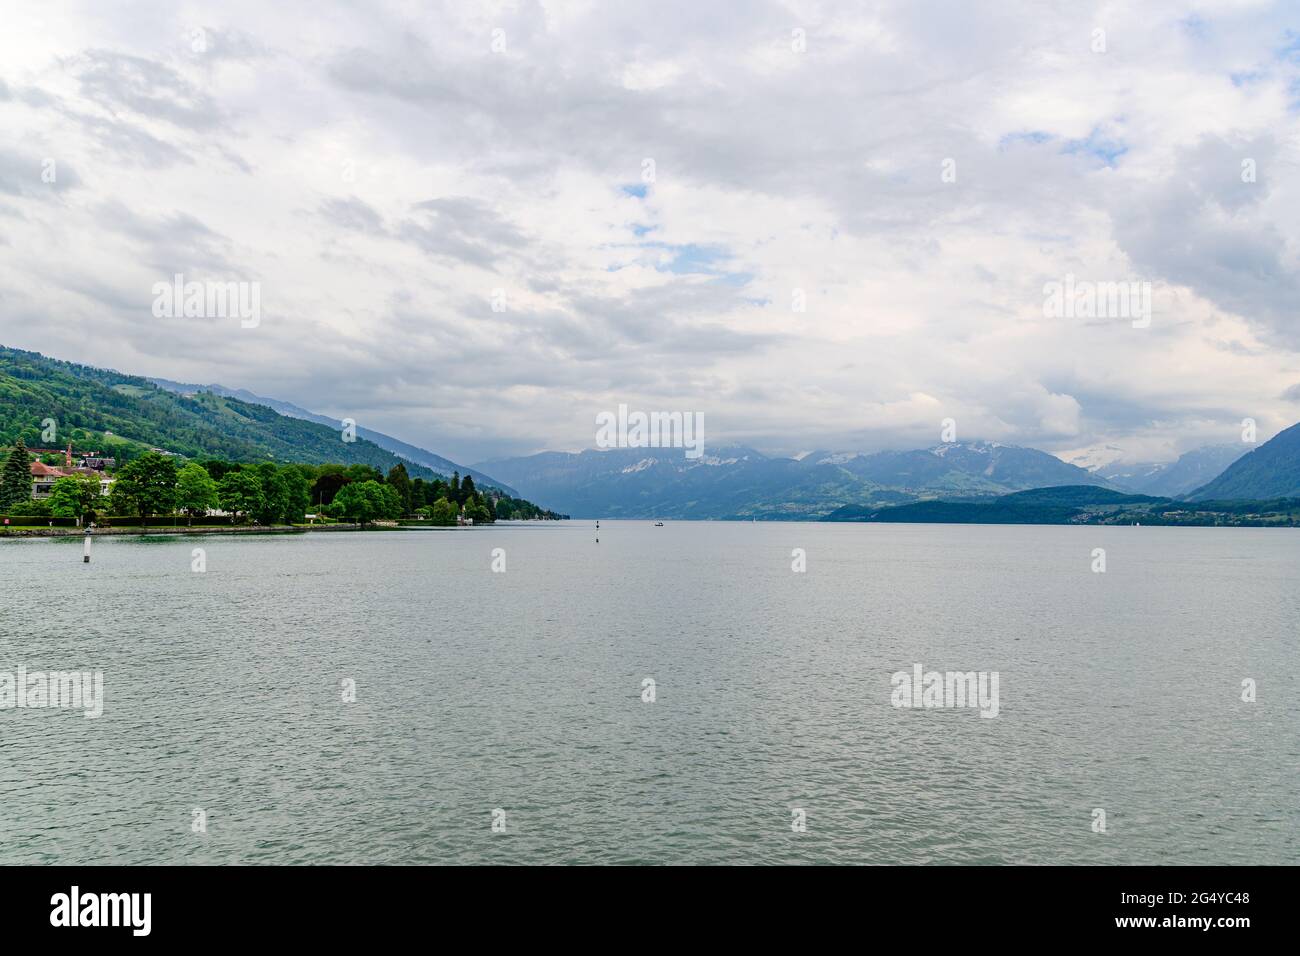 Amazing postcard view on Thun Lake (Thunersee, Thuner See), alps mountains Eiger, Jungfrau, Monch (Moench, Mönch), with a birds. Thun, Switzerland. Stock Photo